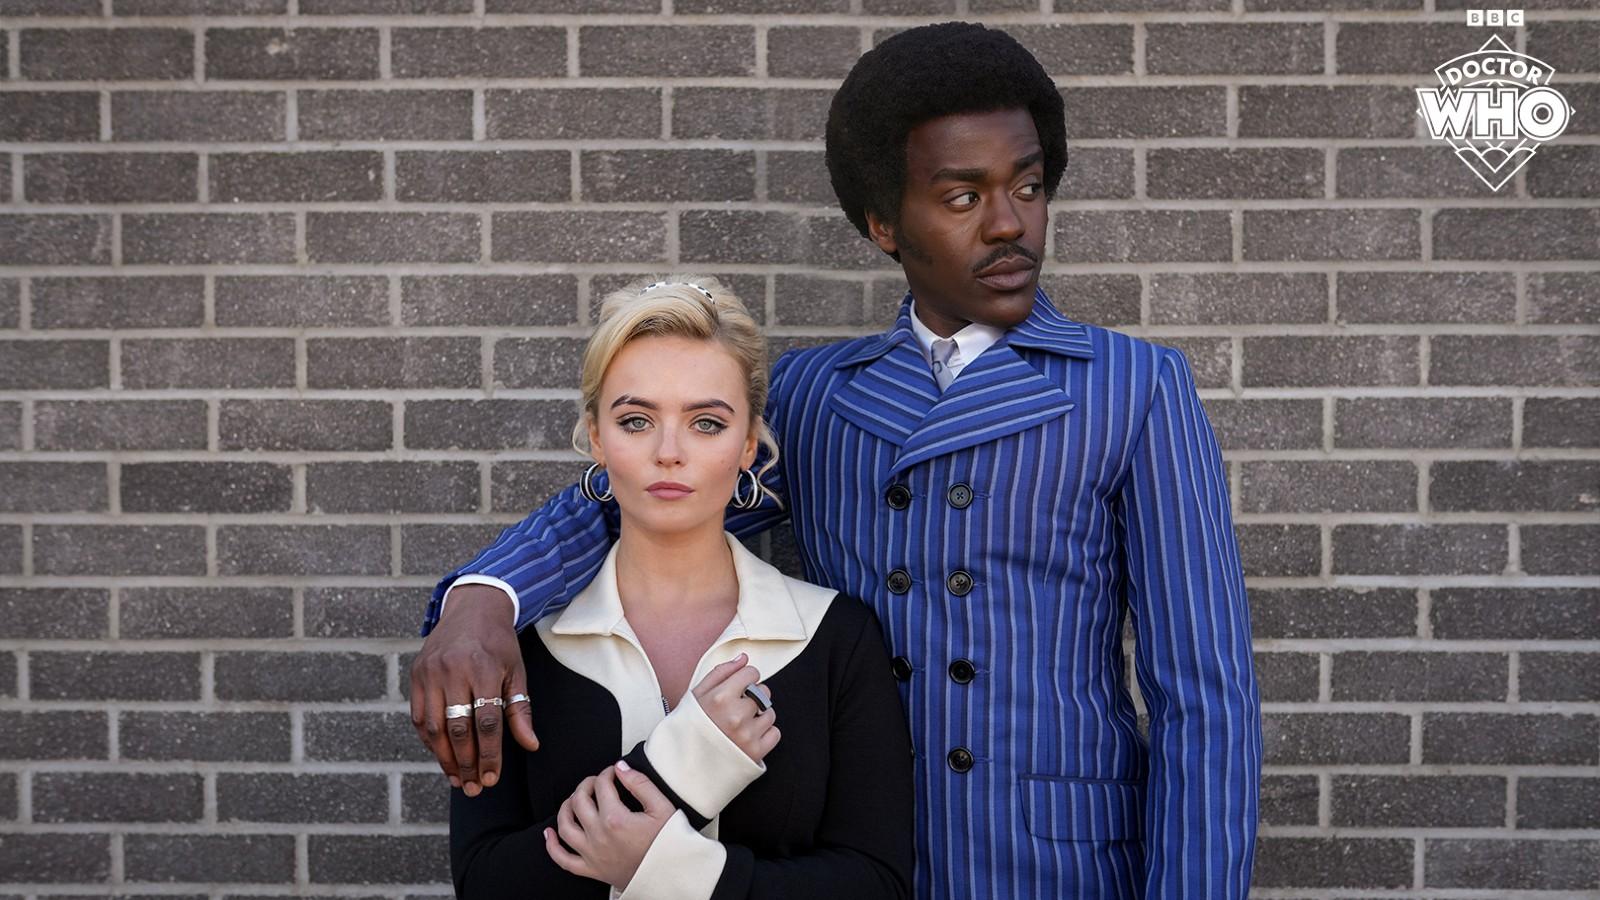 A promotional image of Ncuti Gatwa and Millie Gibson as The Doctor and Ruby Sunday in Season 14 of Doctor Who.